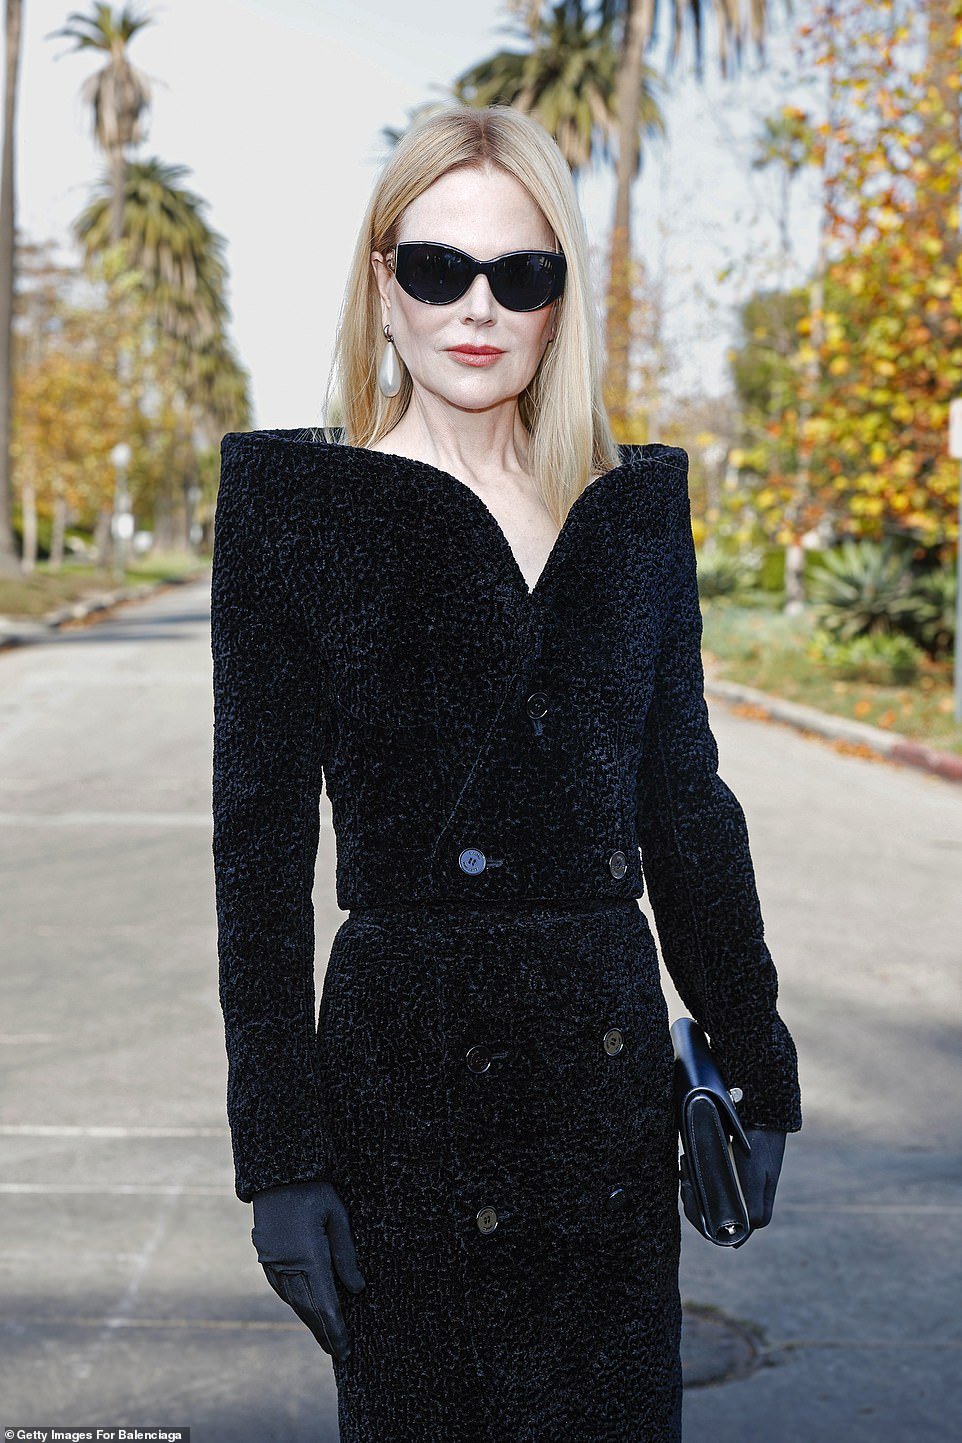 Nicole added even more glamor to her look with a large pearl earring, black gloves and sunglasses